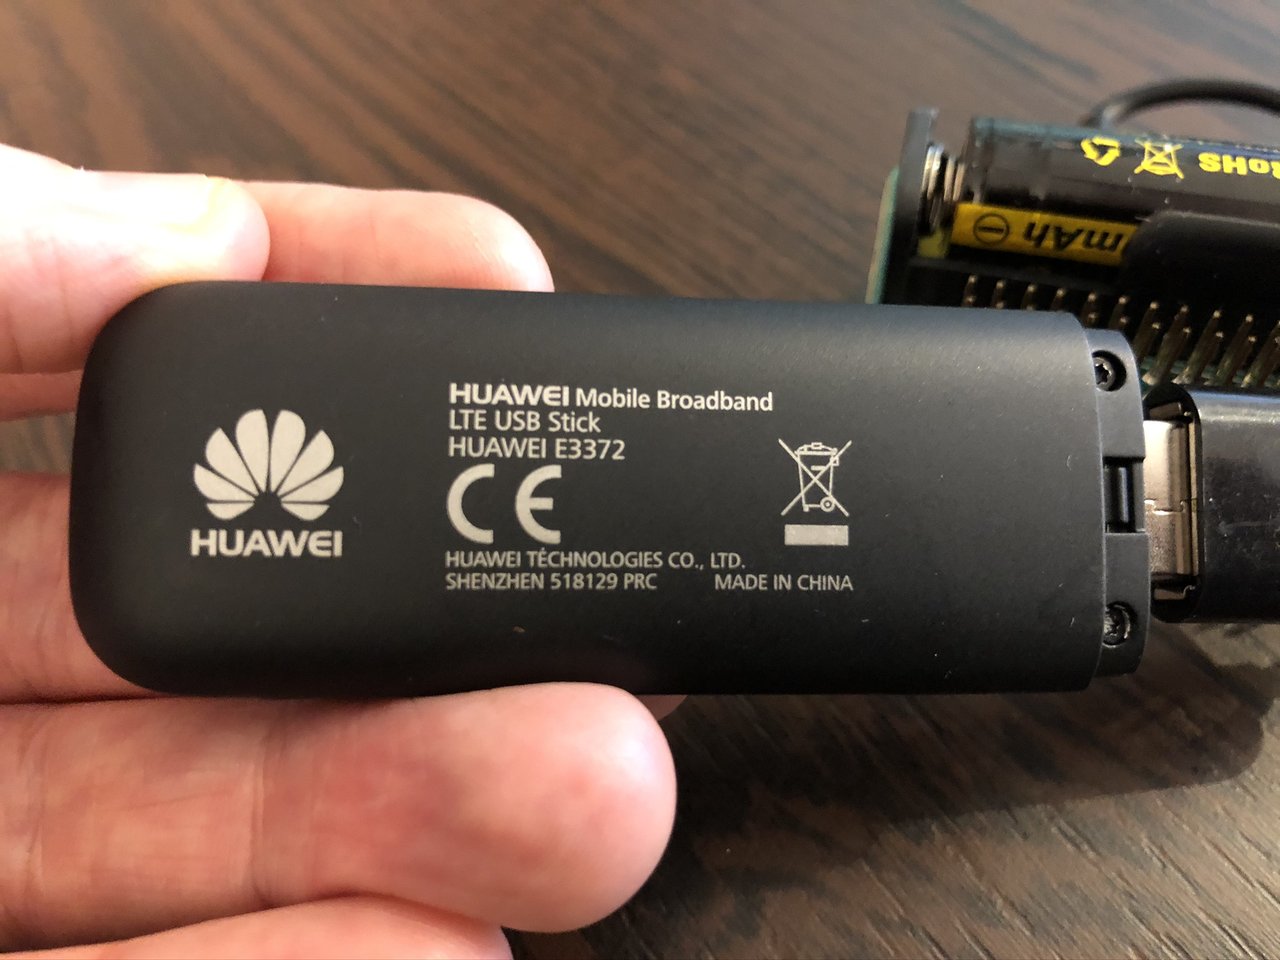 Close-up of the Huawei Mobile Broadband LTE USB Stick E3372 used in the prototype.